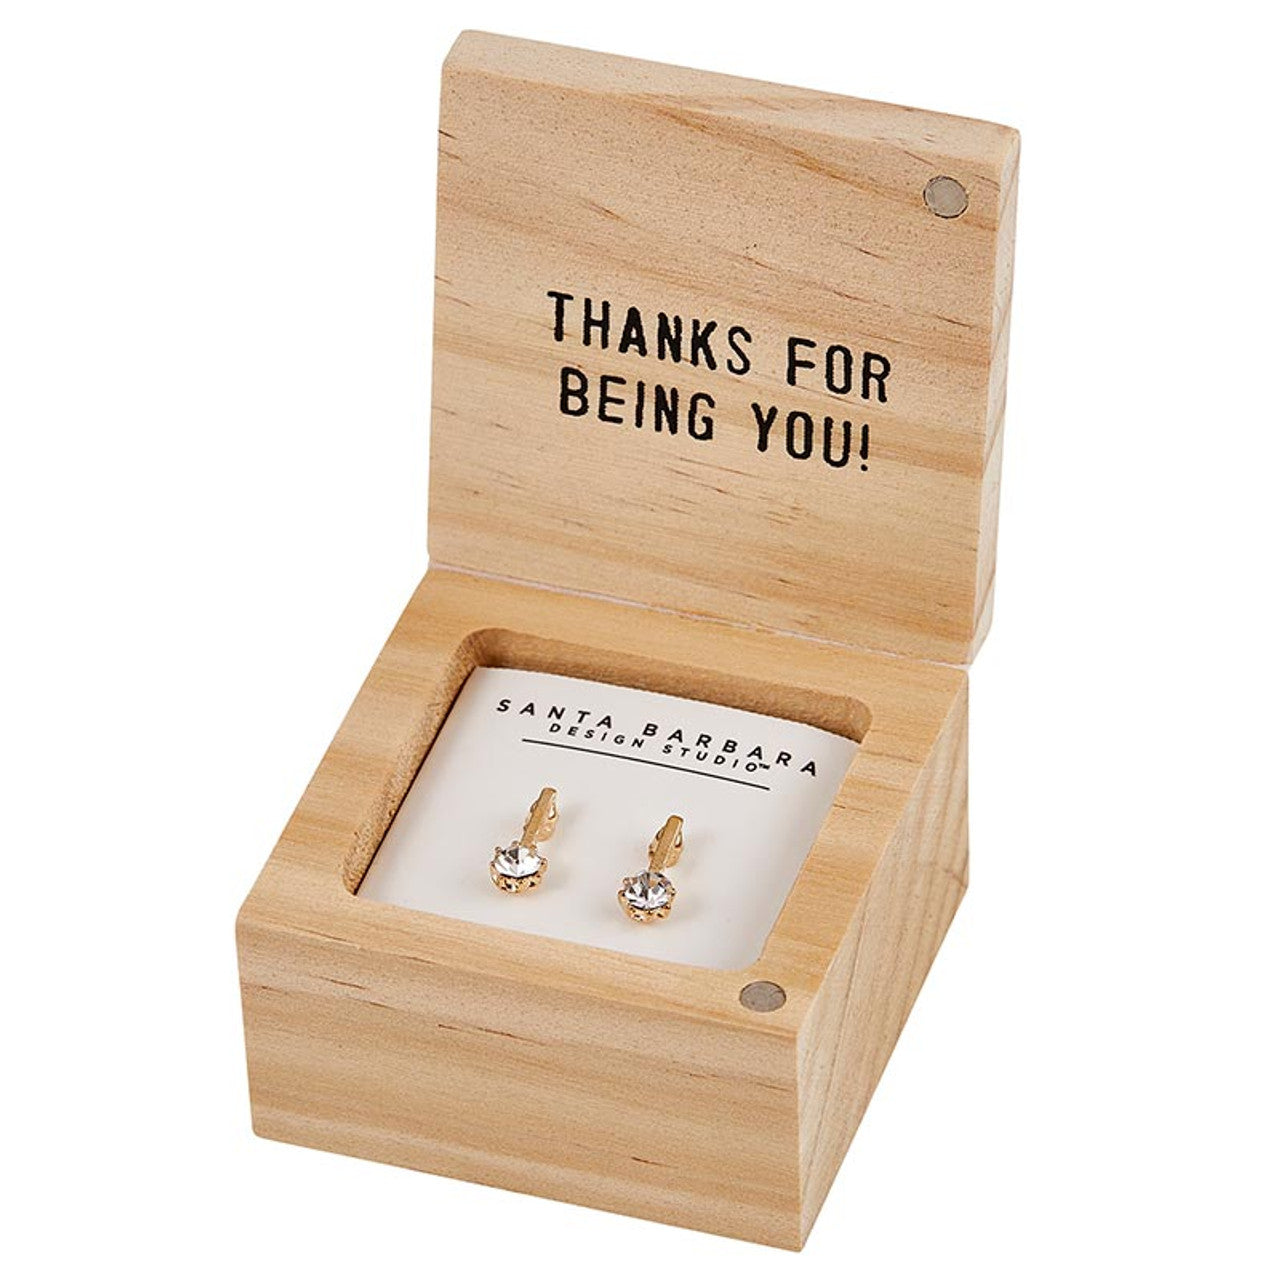 You Are One in a Million Treasure Box Earrings | In a Wooden Gift Box